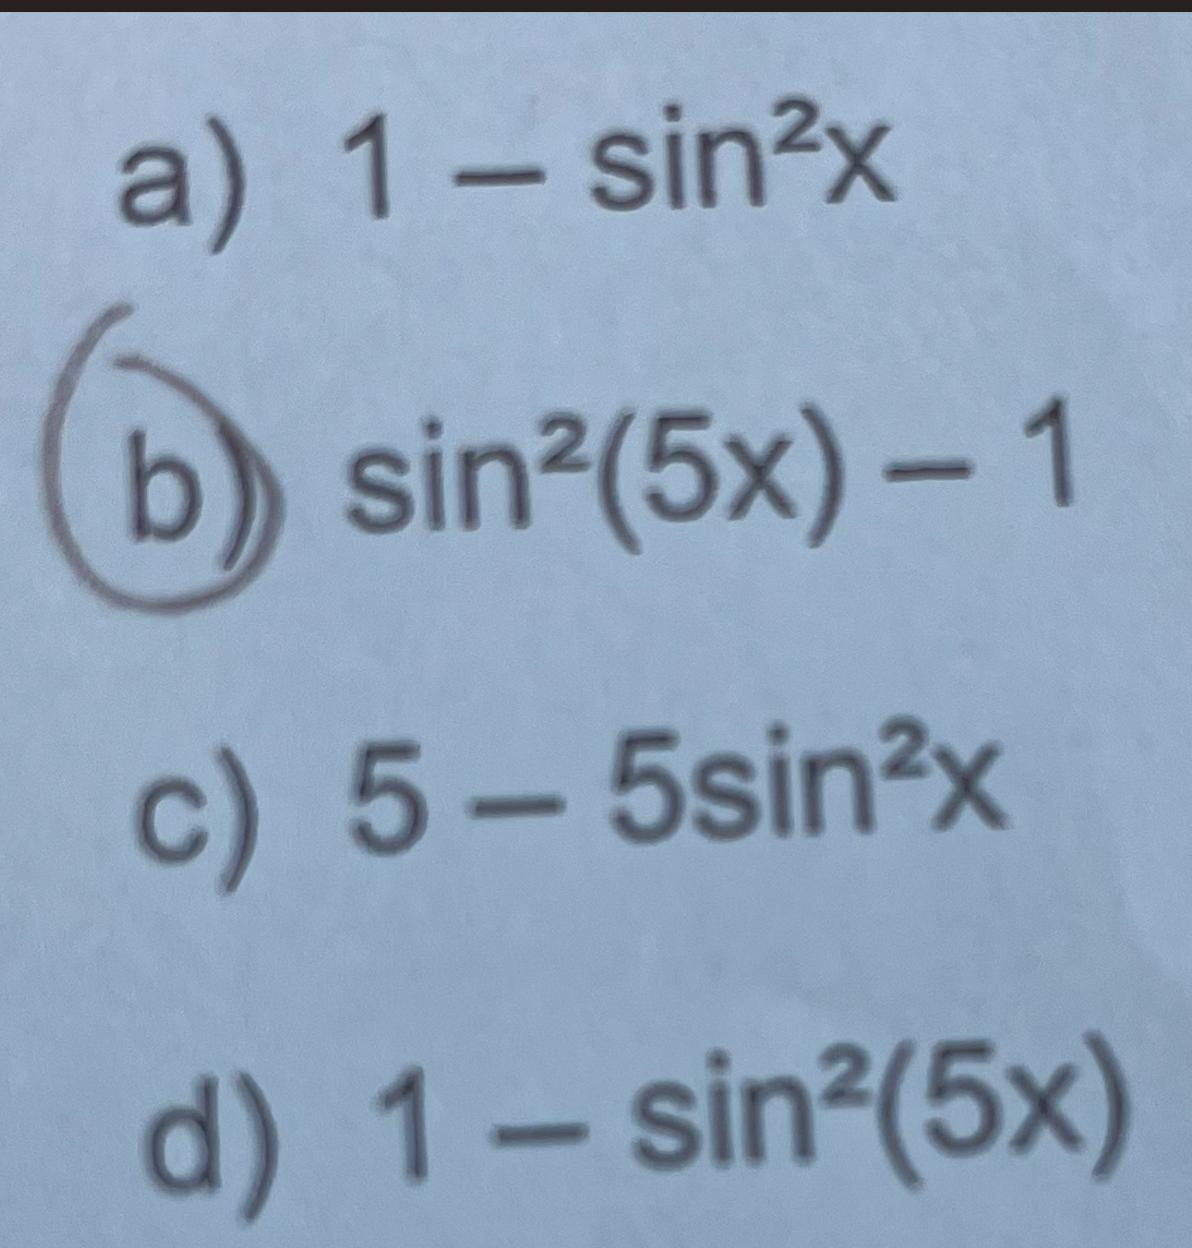 Need Answer To Pictured Problem! The Answer Should Be In Reference To Trig Identities